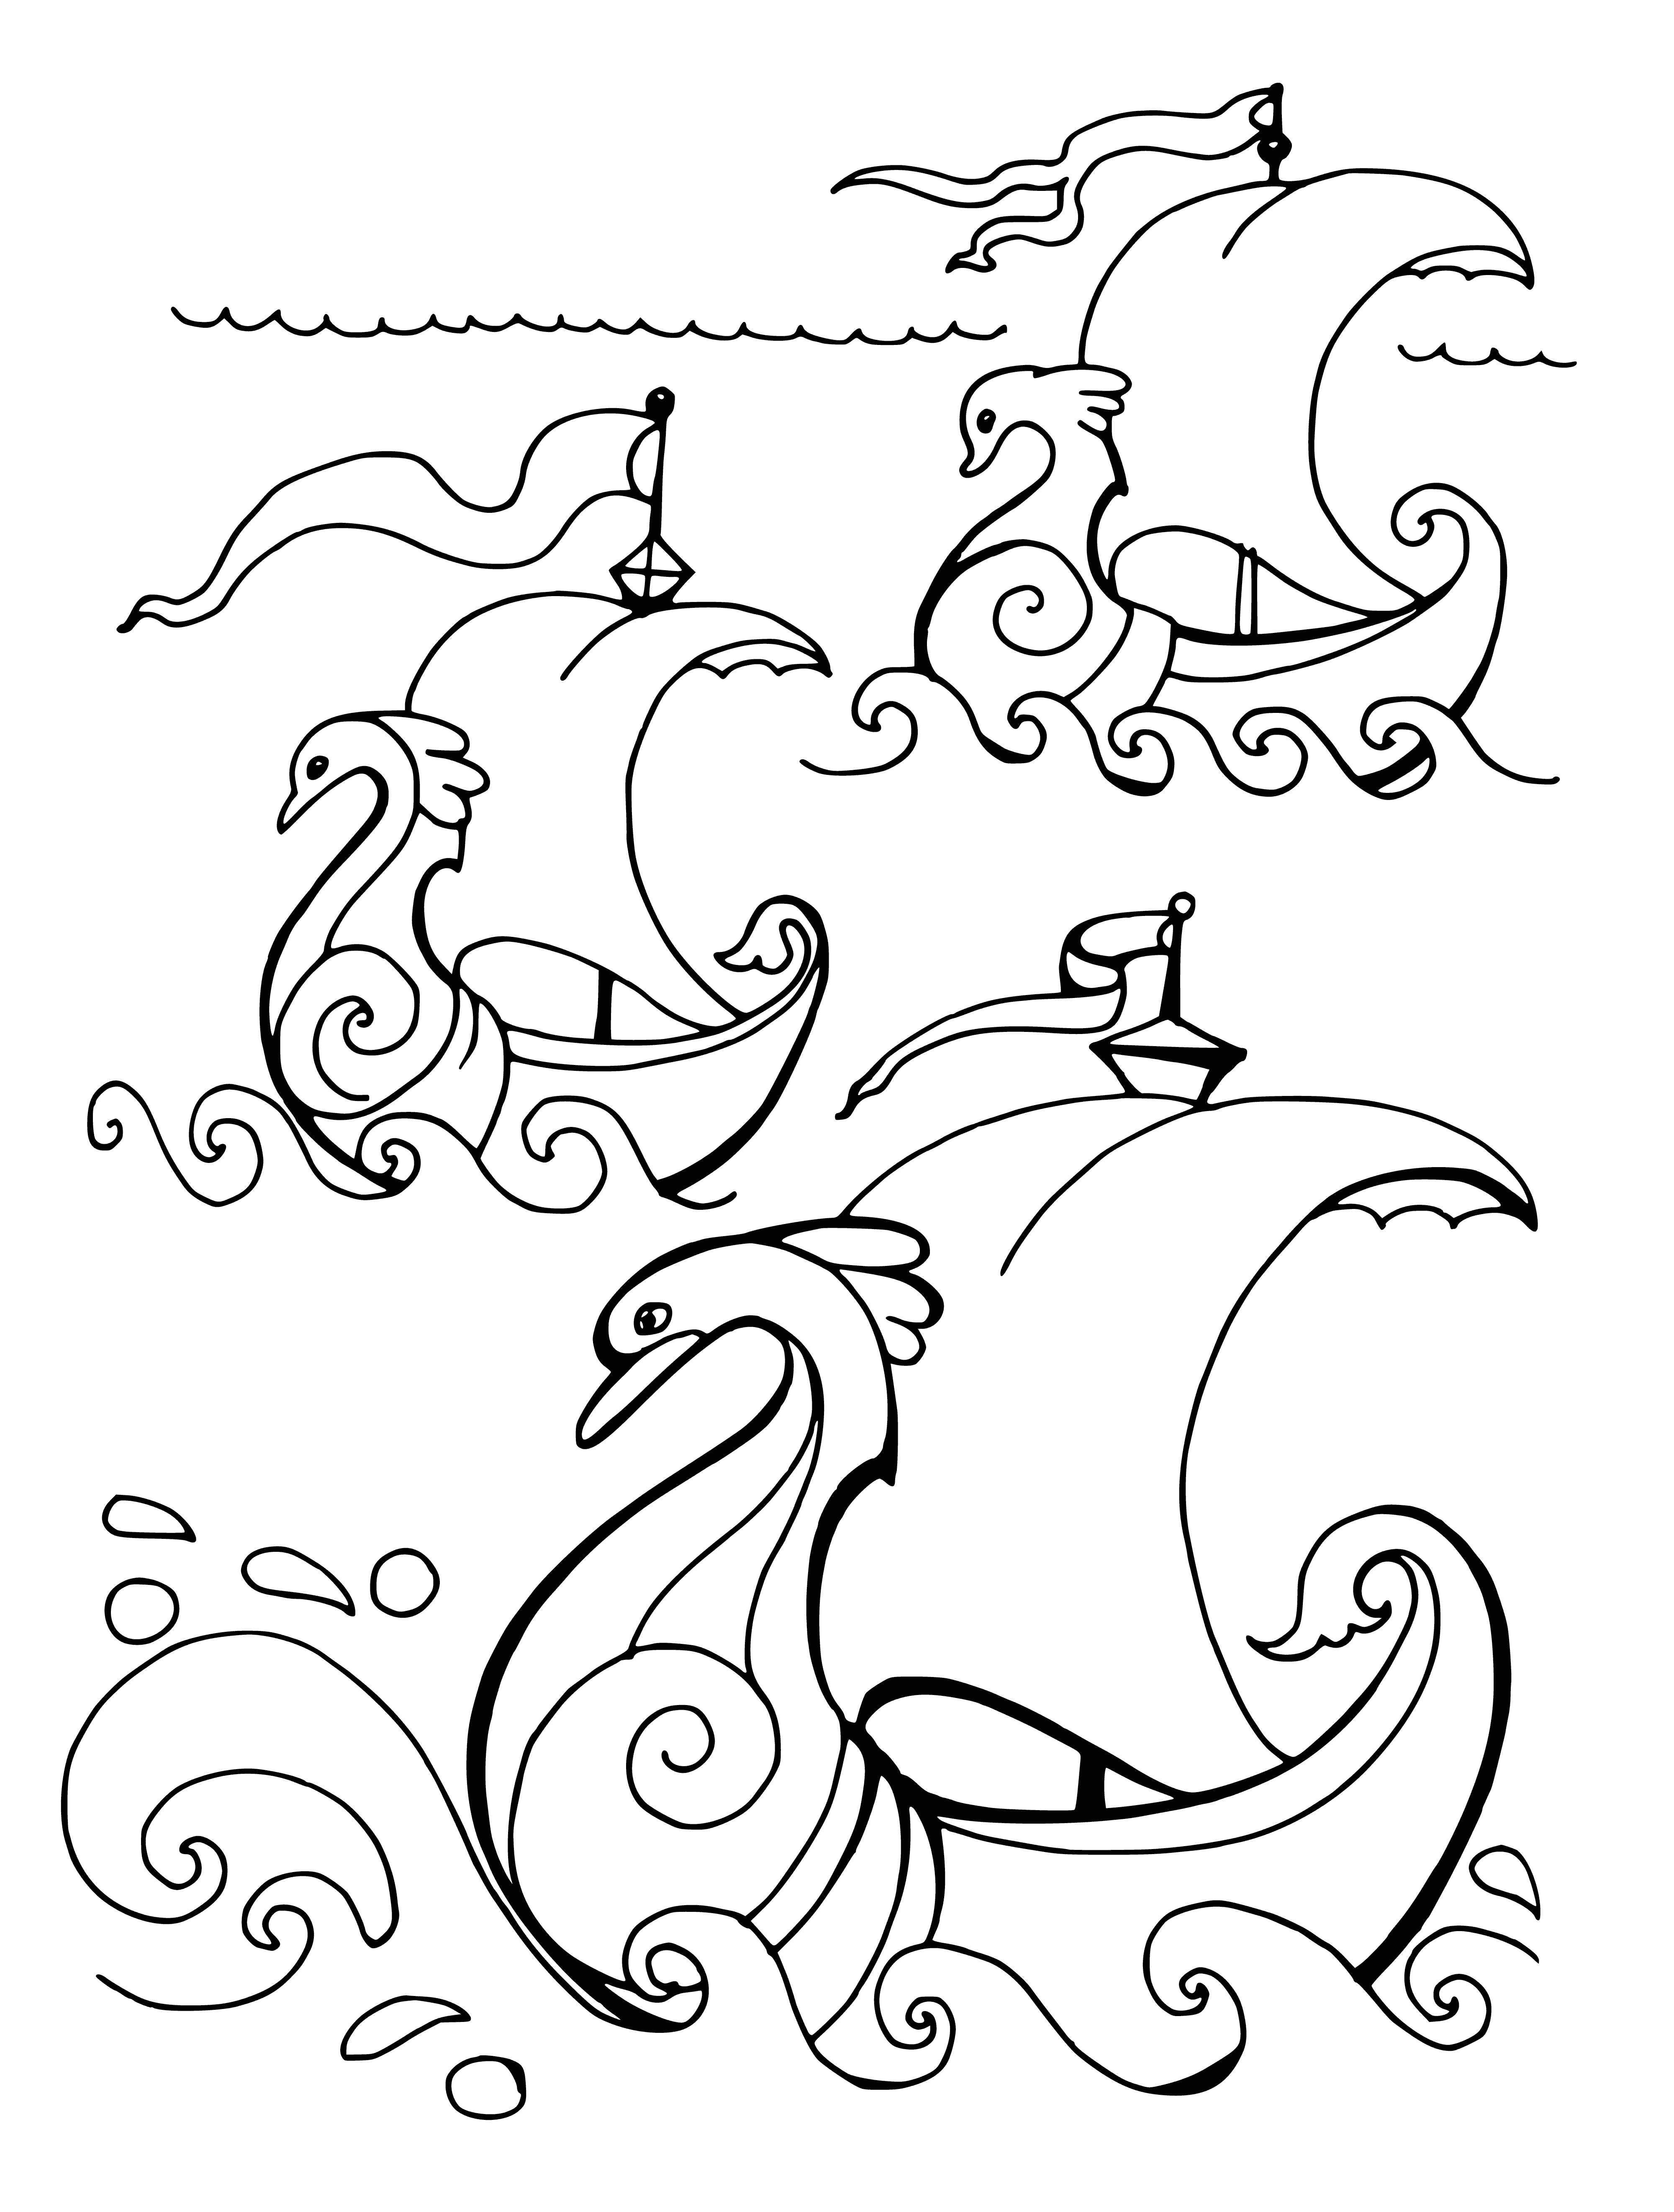 coloring page: Russian author Alexander Pushkin wrote "Tales of the Sea", a book of short maritime tales, first published in 1833.